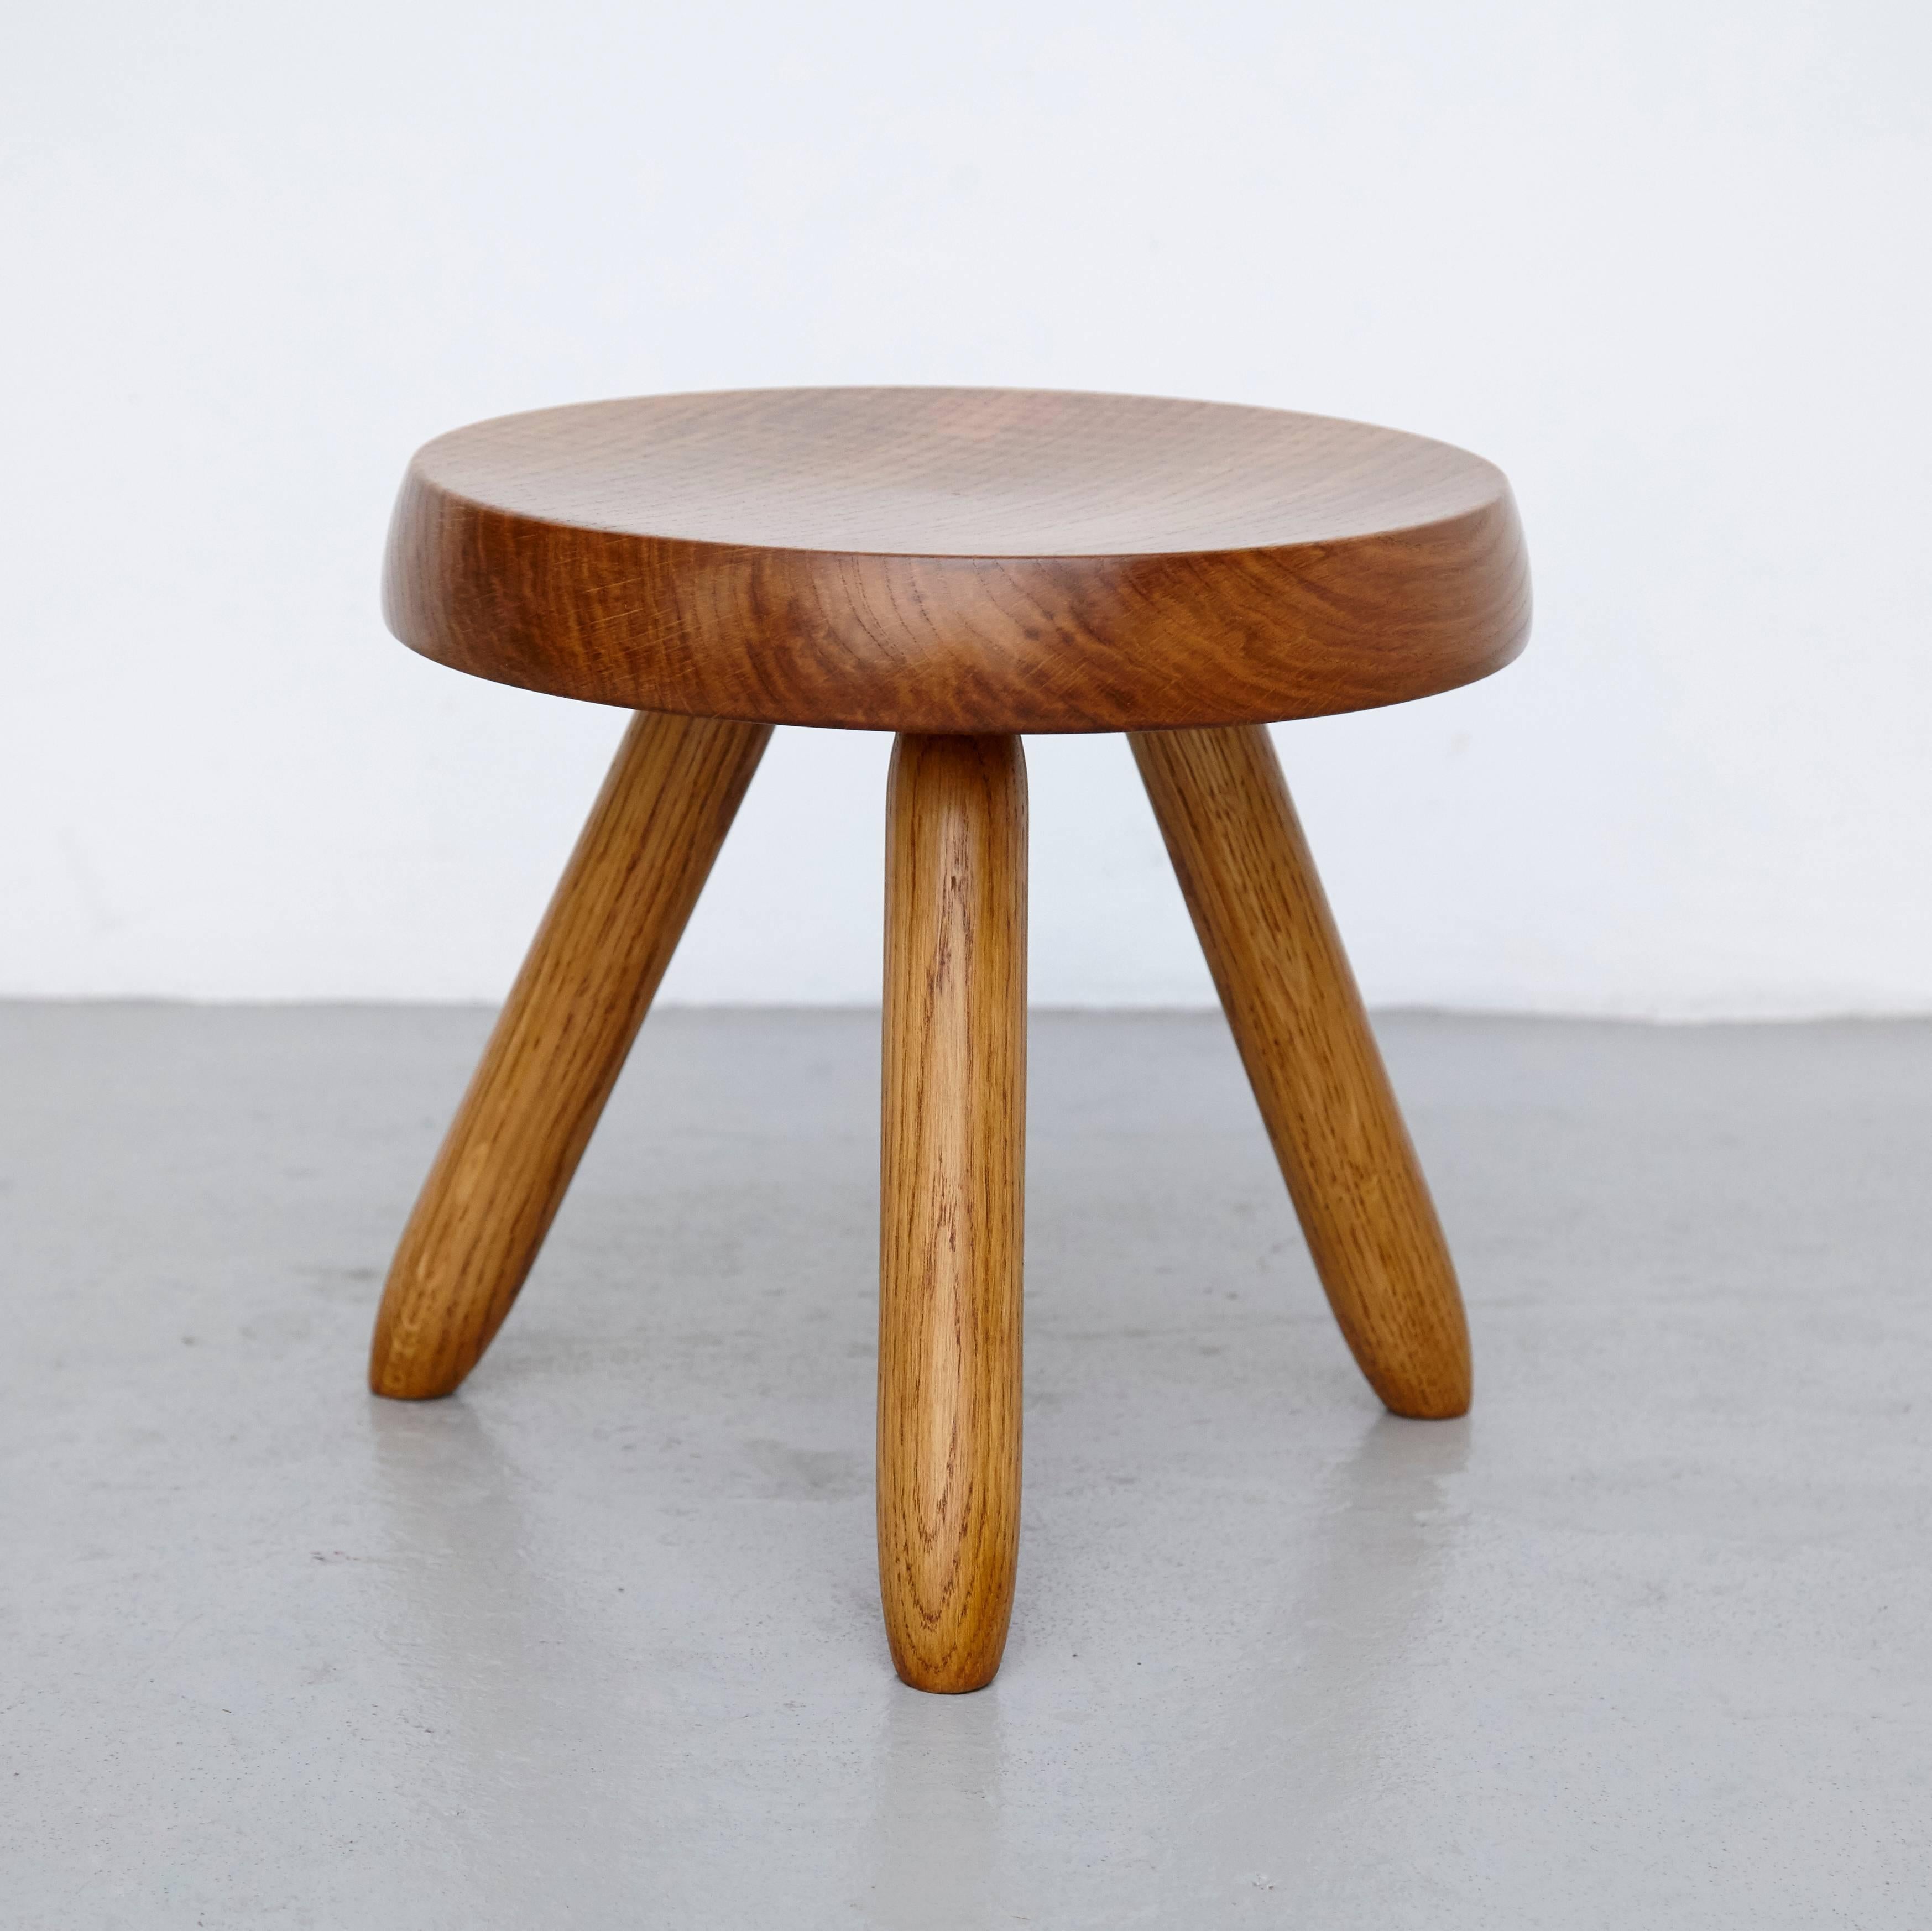 Set of Three Stools in the Style of Charlotte Perriand 2